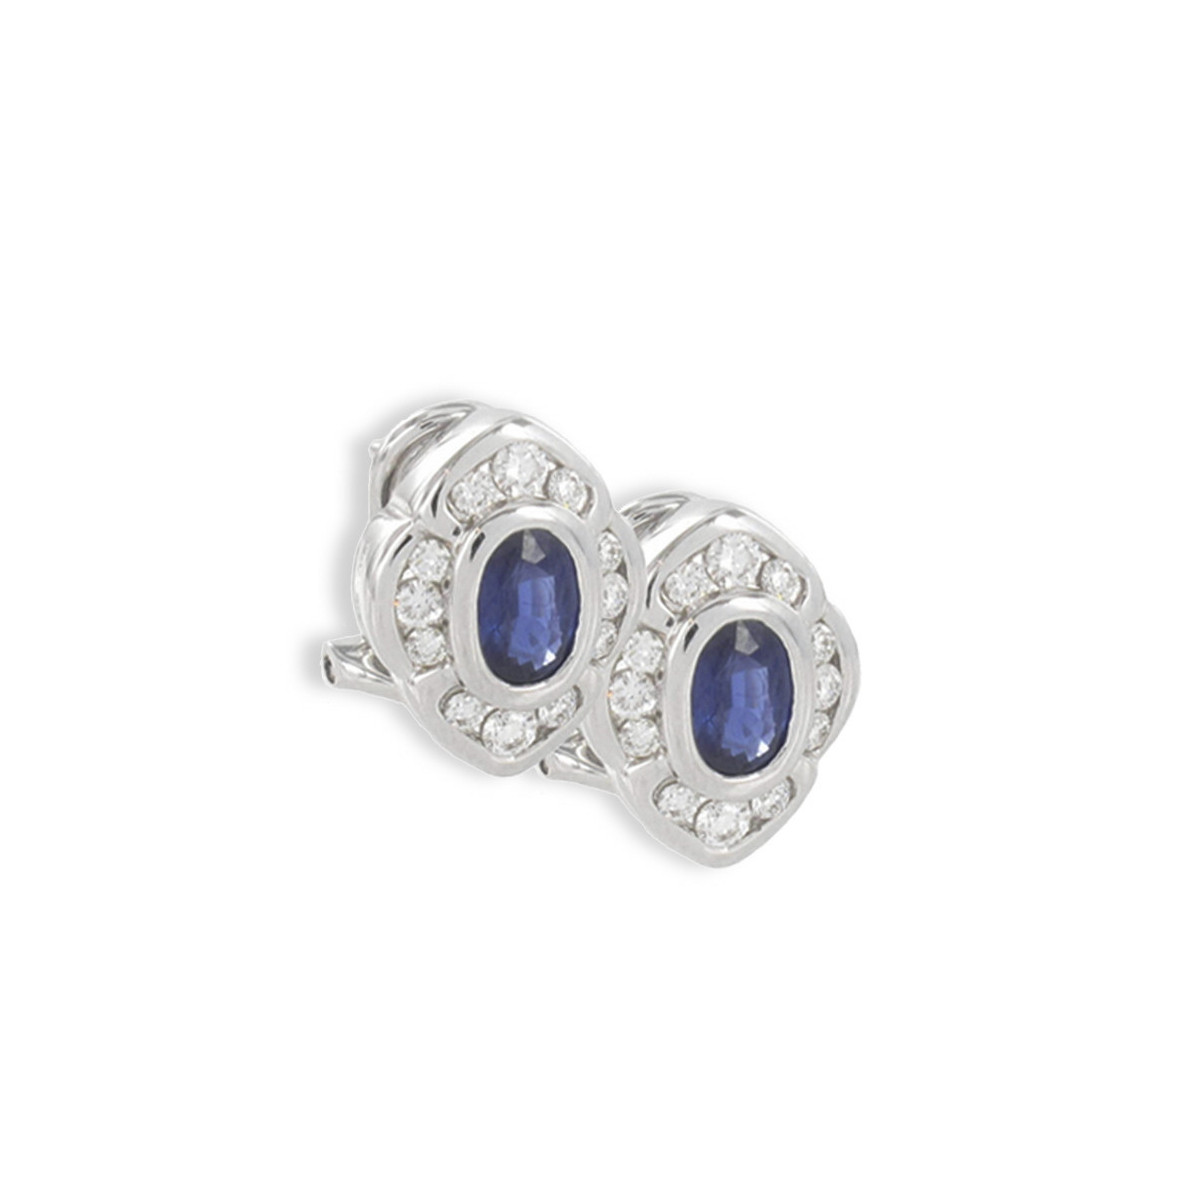 GOLD DIAMONDS AND SAPPHIRES EARRING